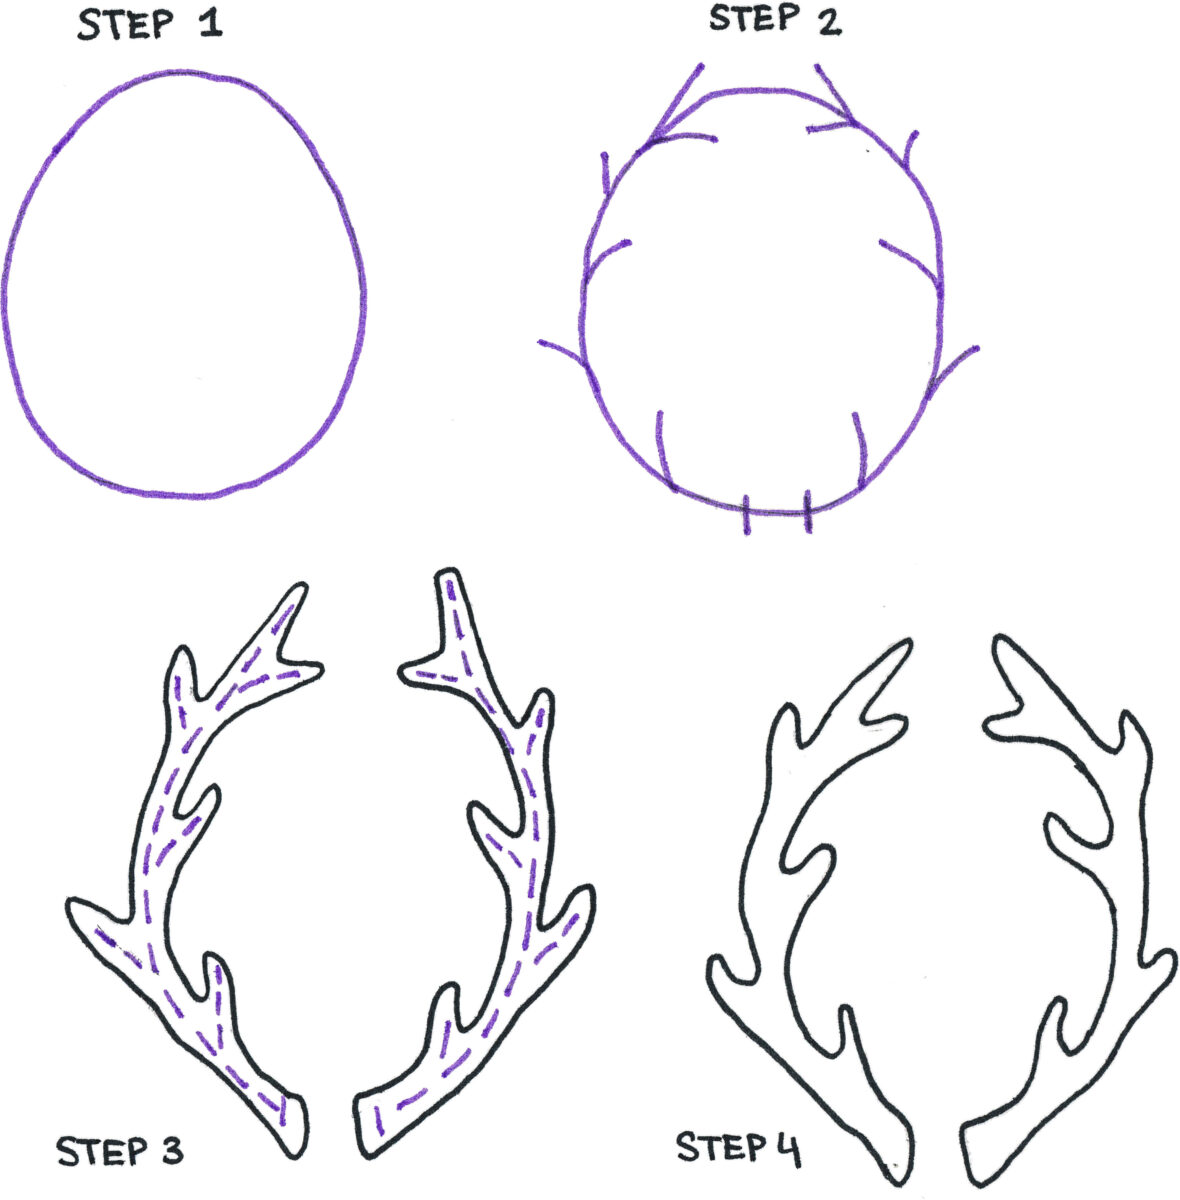 Four steps to drawing antlers are drawing an oval, adding lines, drawing an outline, and erasing steps one through two.